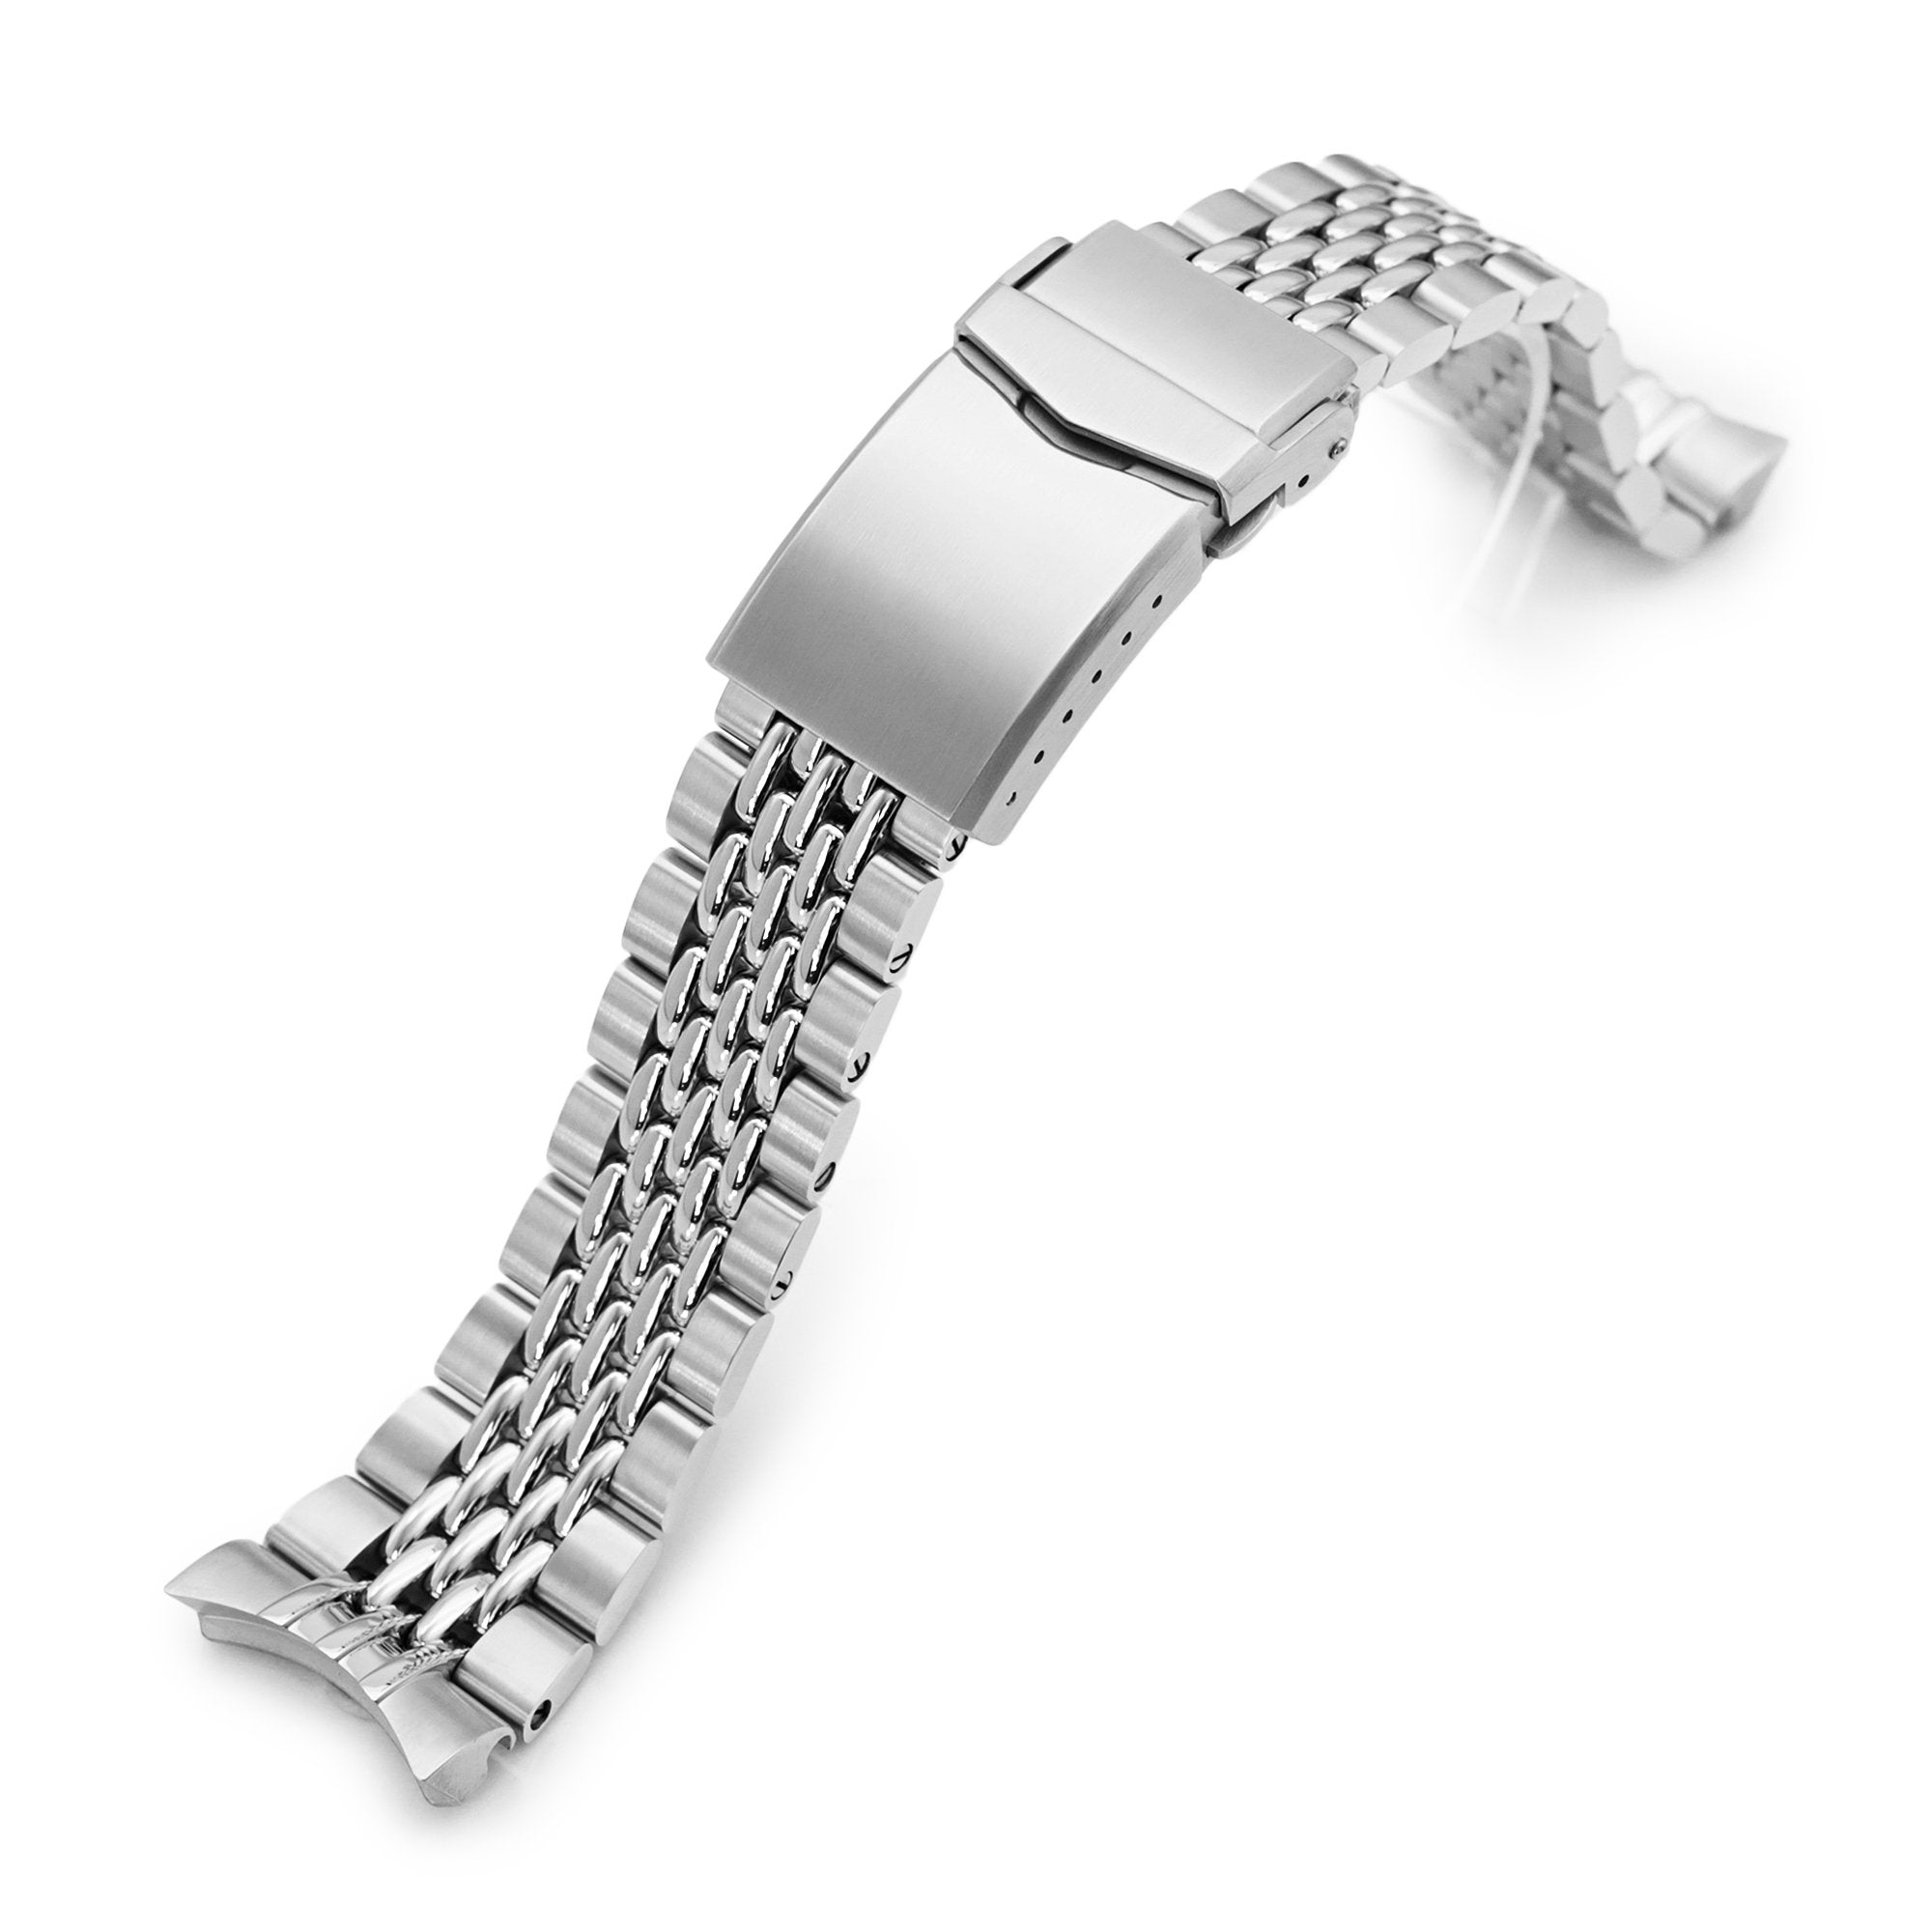 22mm Goma BOR 316L Stainless Steel Watch Band for Orient Kamasu, Brushed and Polished V-Clasp Strapcode Watch Bands